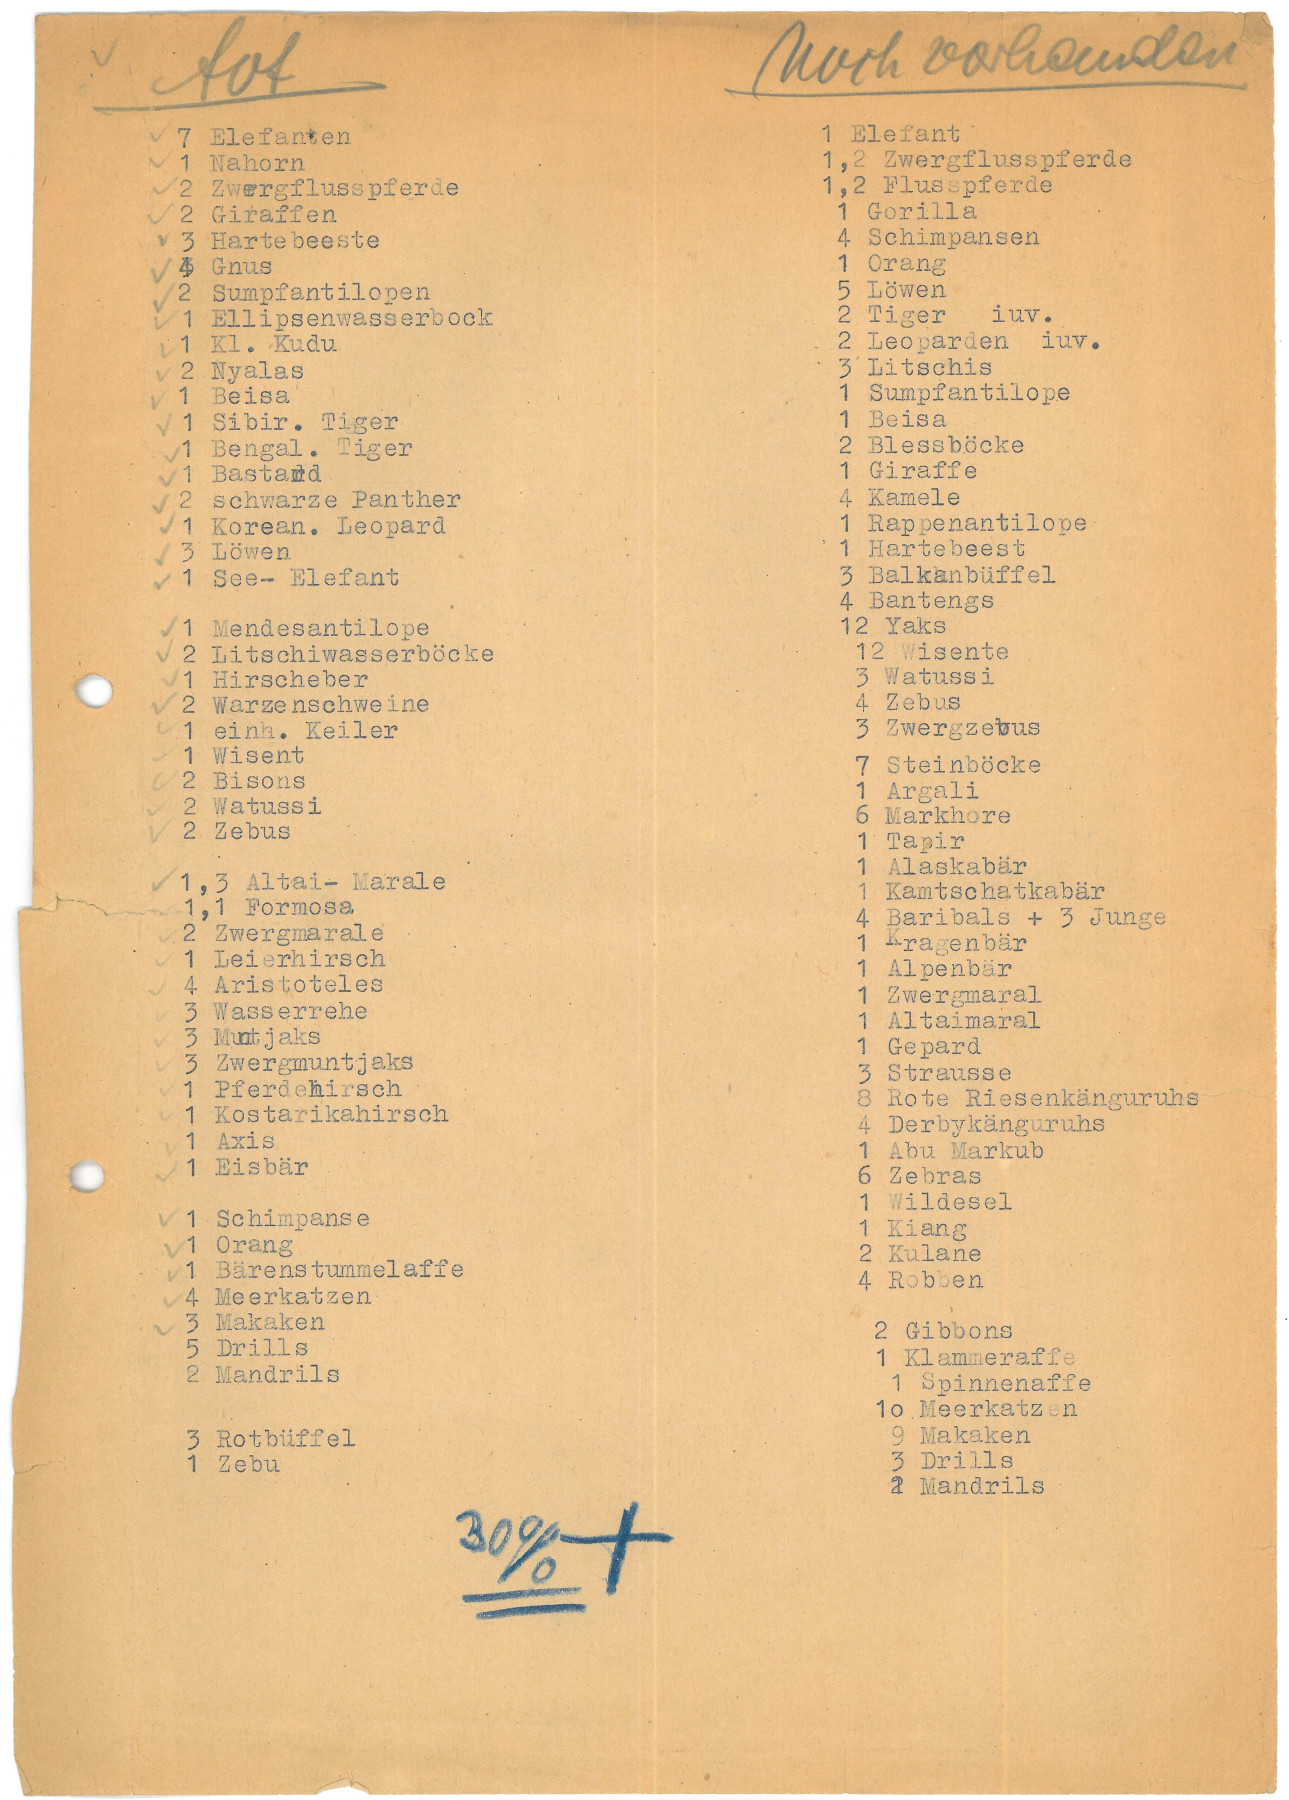 Punched typewritten sheet with two columns: dead; still present. Handwritten note in the center: 30%+. For transcript, see link in caption.